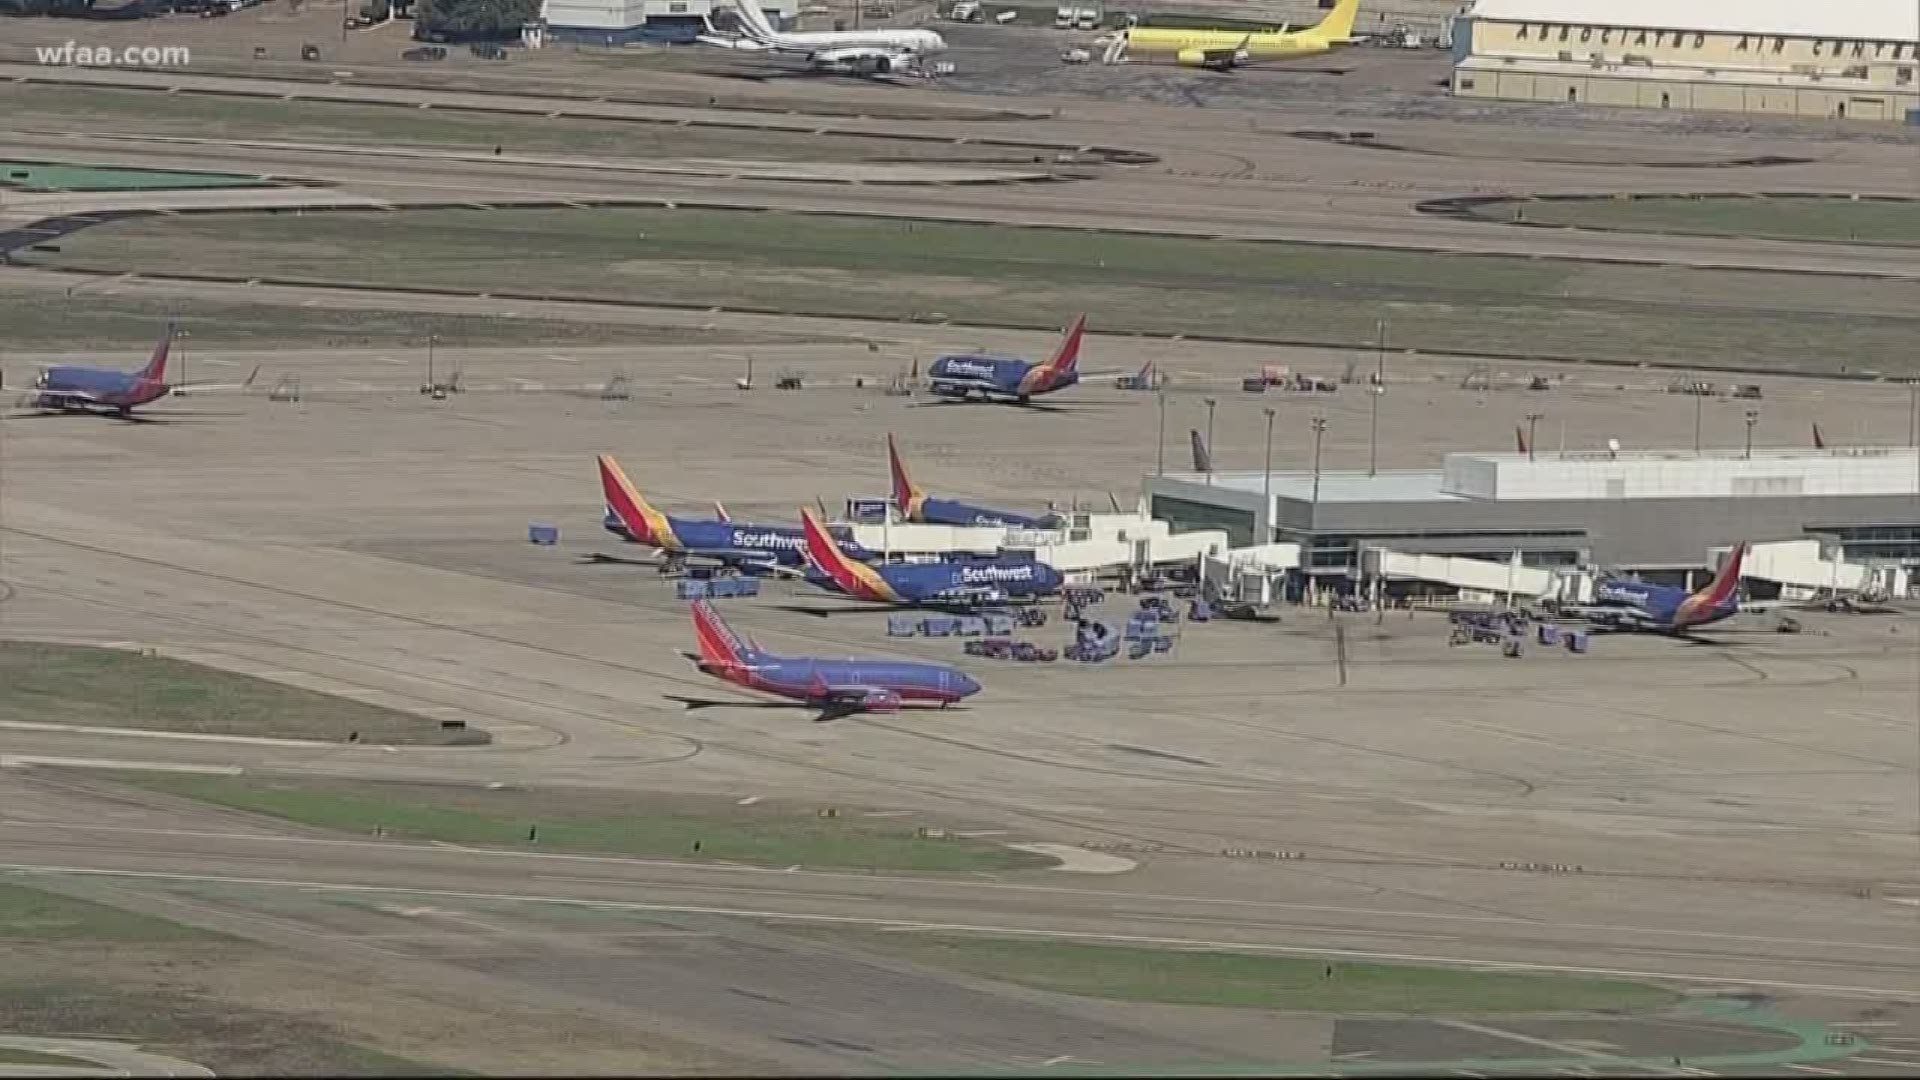 More than a dozen were flying in the U.S. when the FAA grounded them on Wednesday.